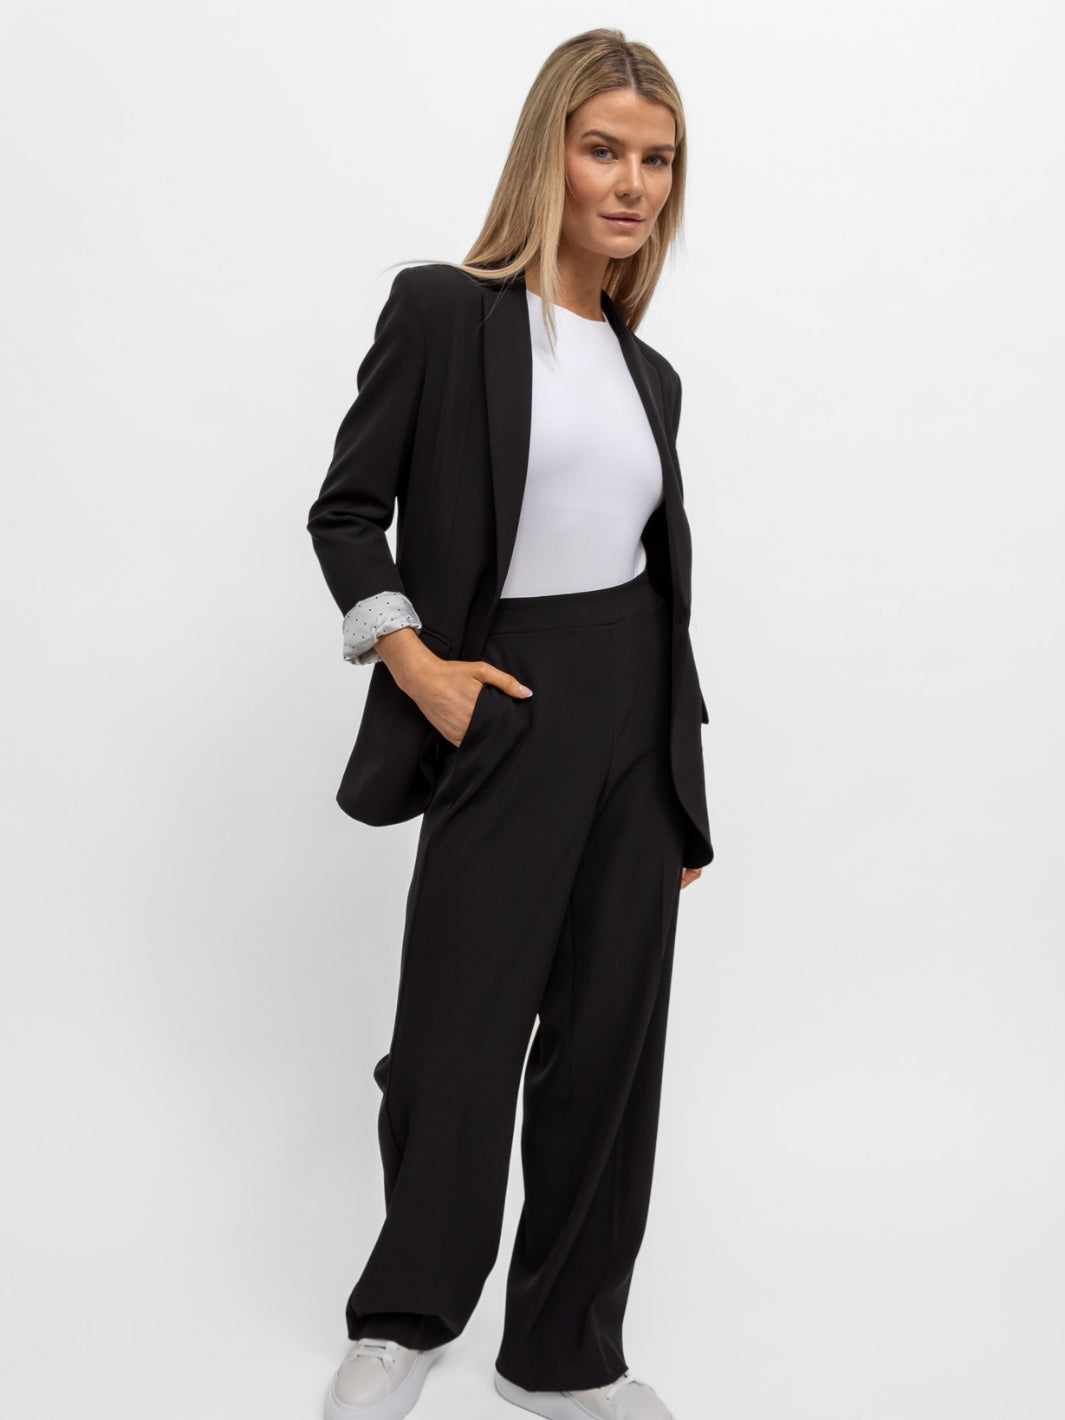 Italian Collection Jacket The Italian Collection Tailored Jacket in Black